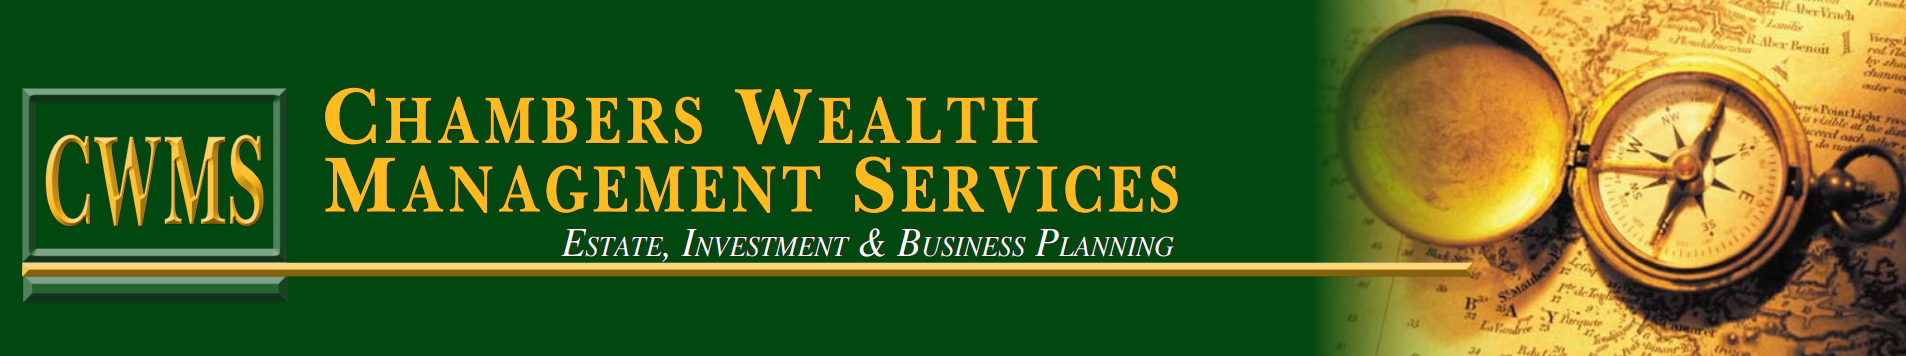 Chambers Wealth Management ServicesEstate, Investment, and Business Planning